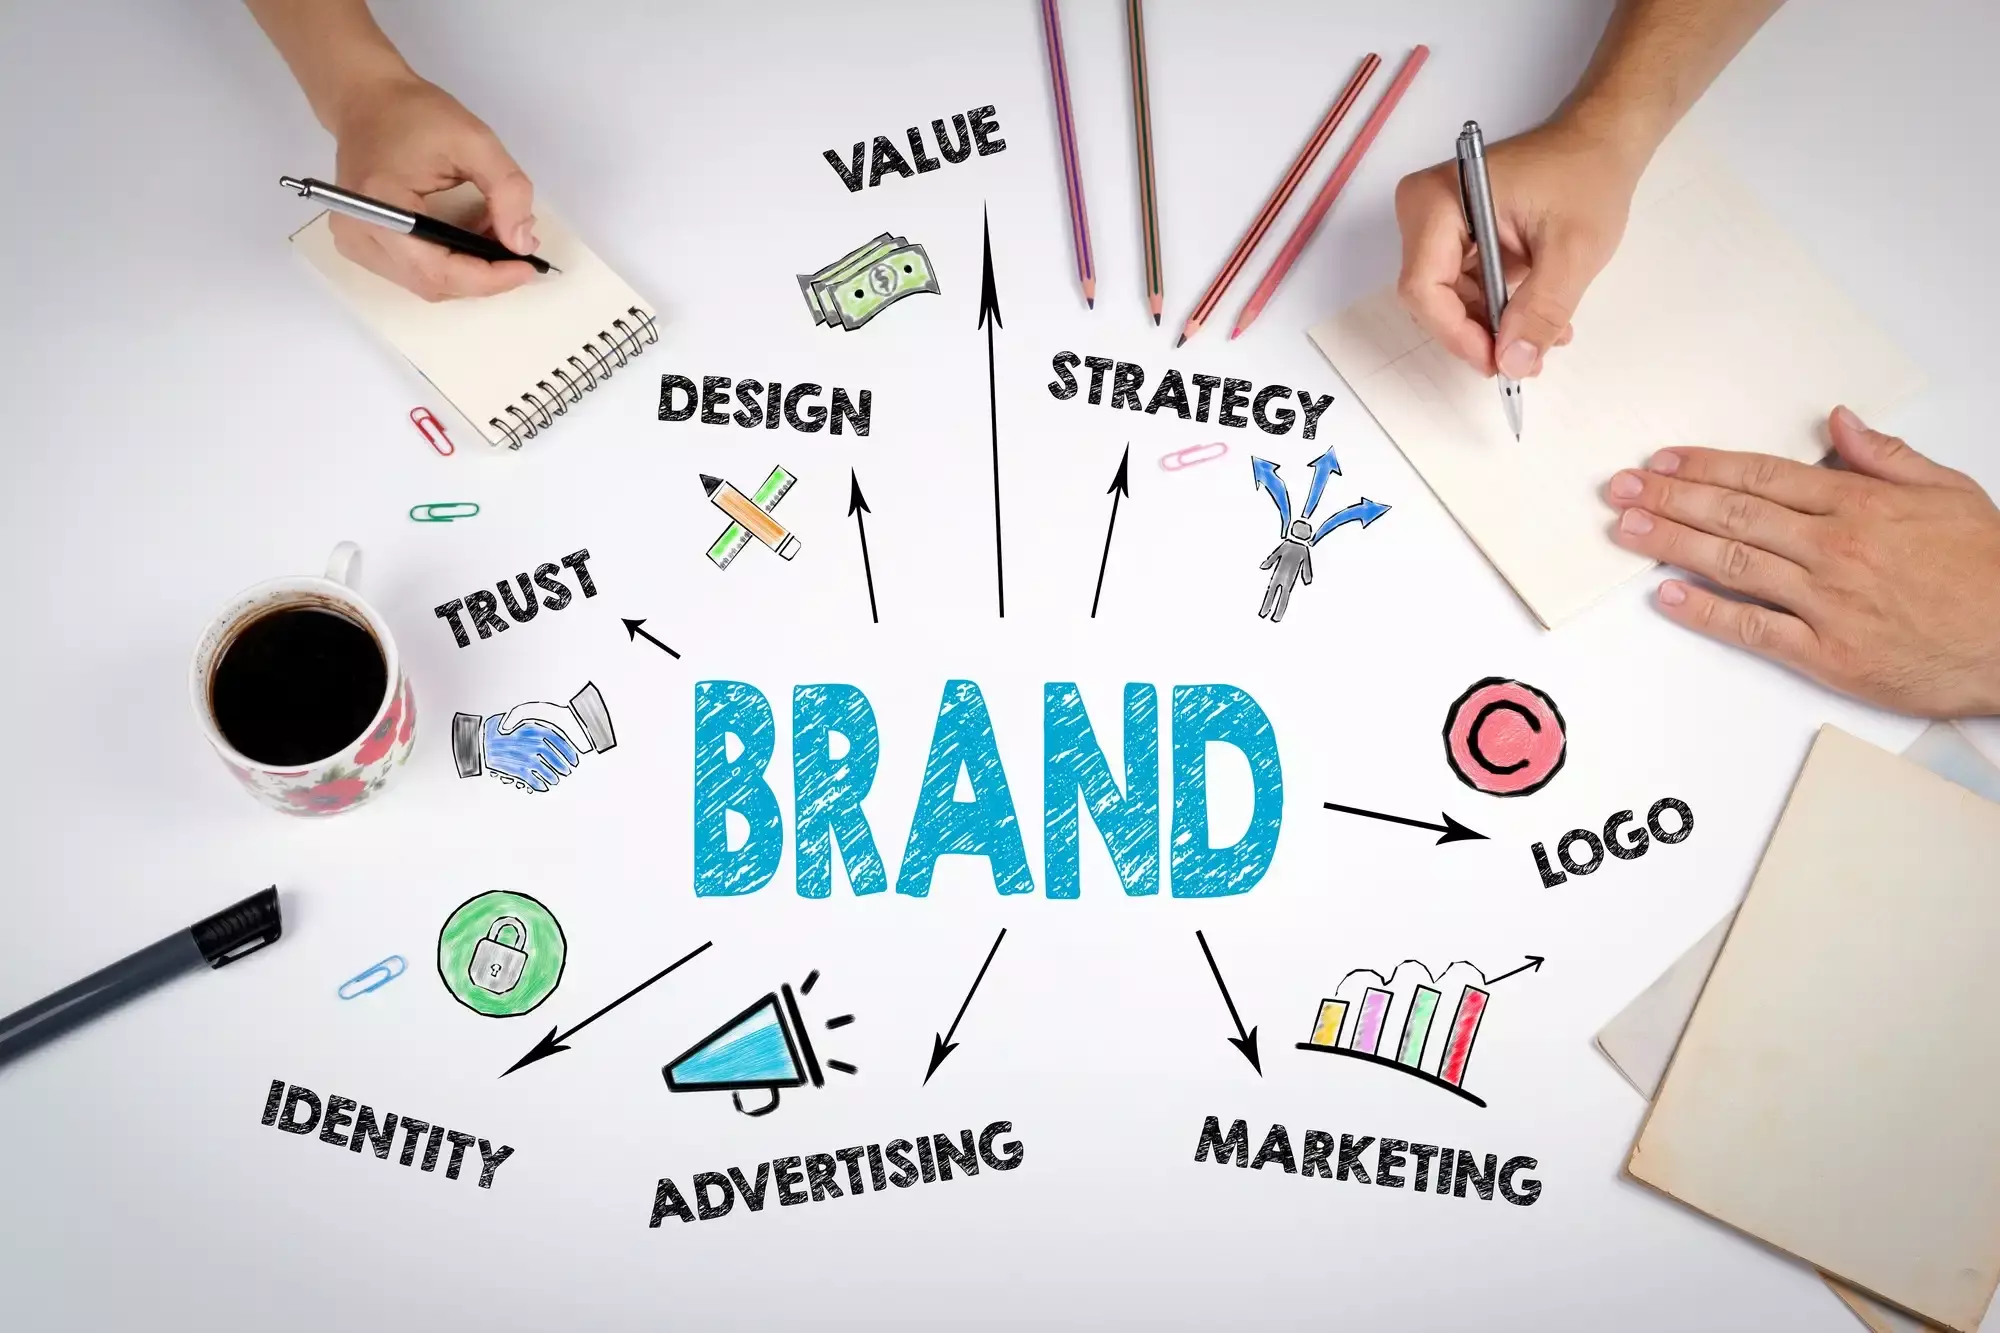 Why Should You Consider Turning Your Business Into A Brand?